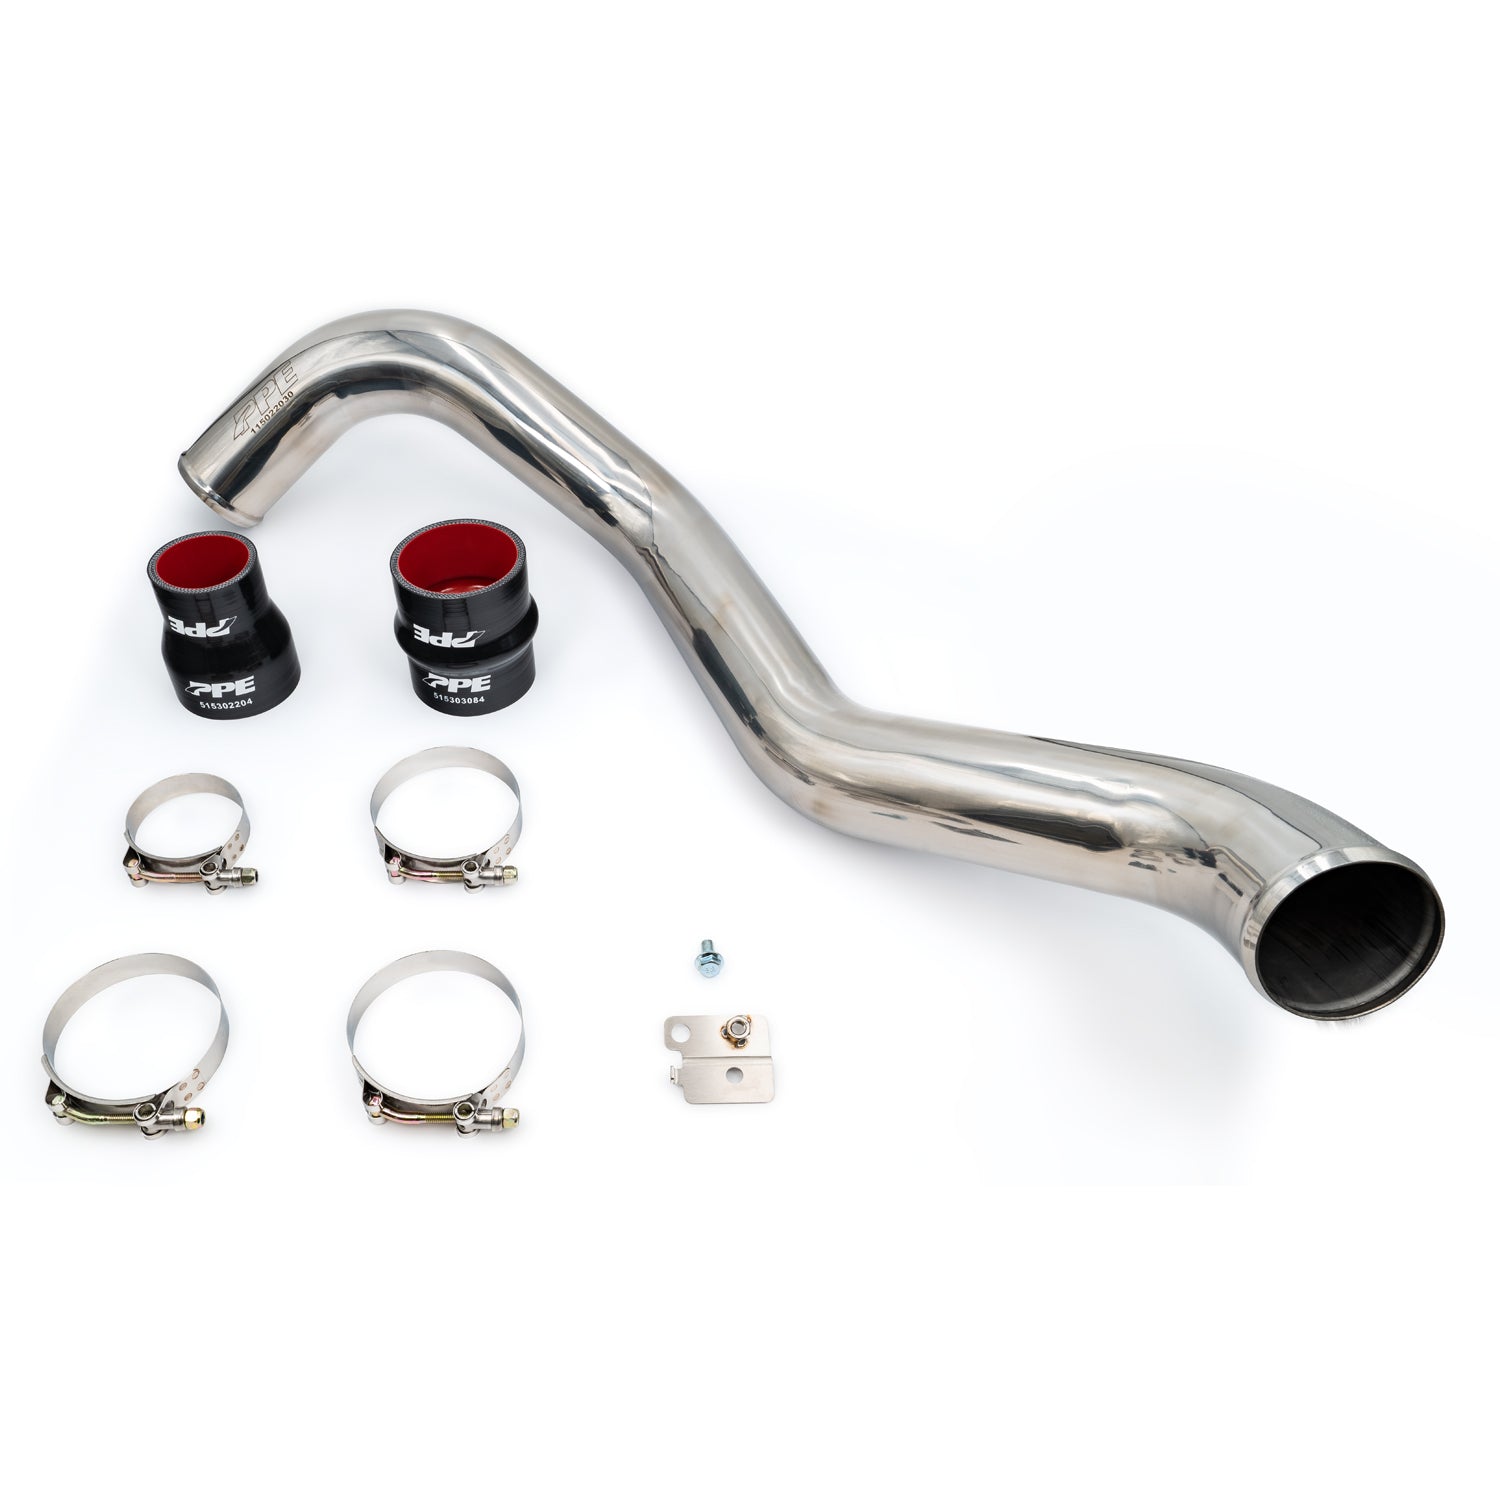 2004-2010 GM 6.6L Duramax Hot Side Intercooler Charge Pipe 3.0 Inch Stainless Steel Polished PPE Diesel